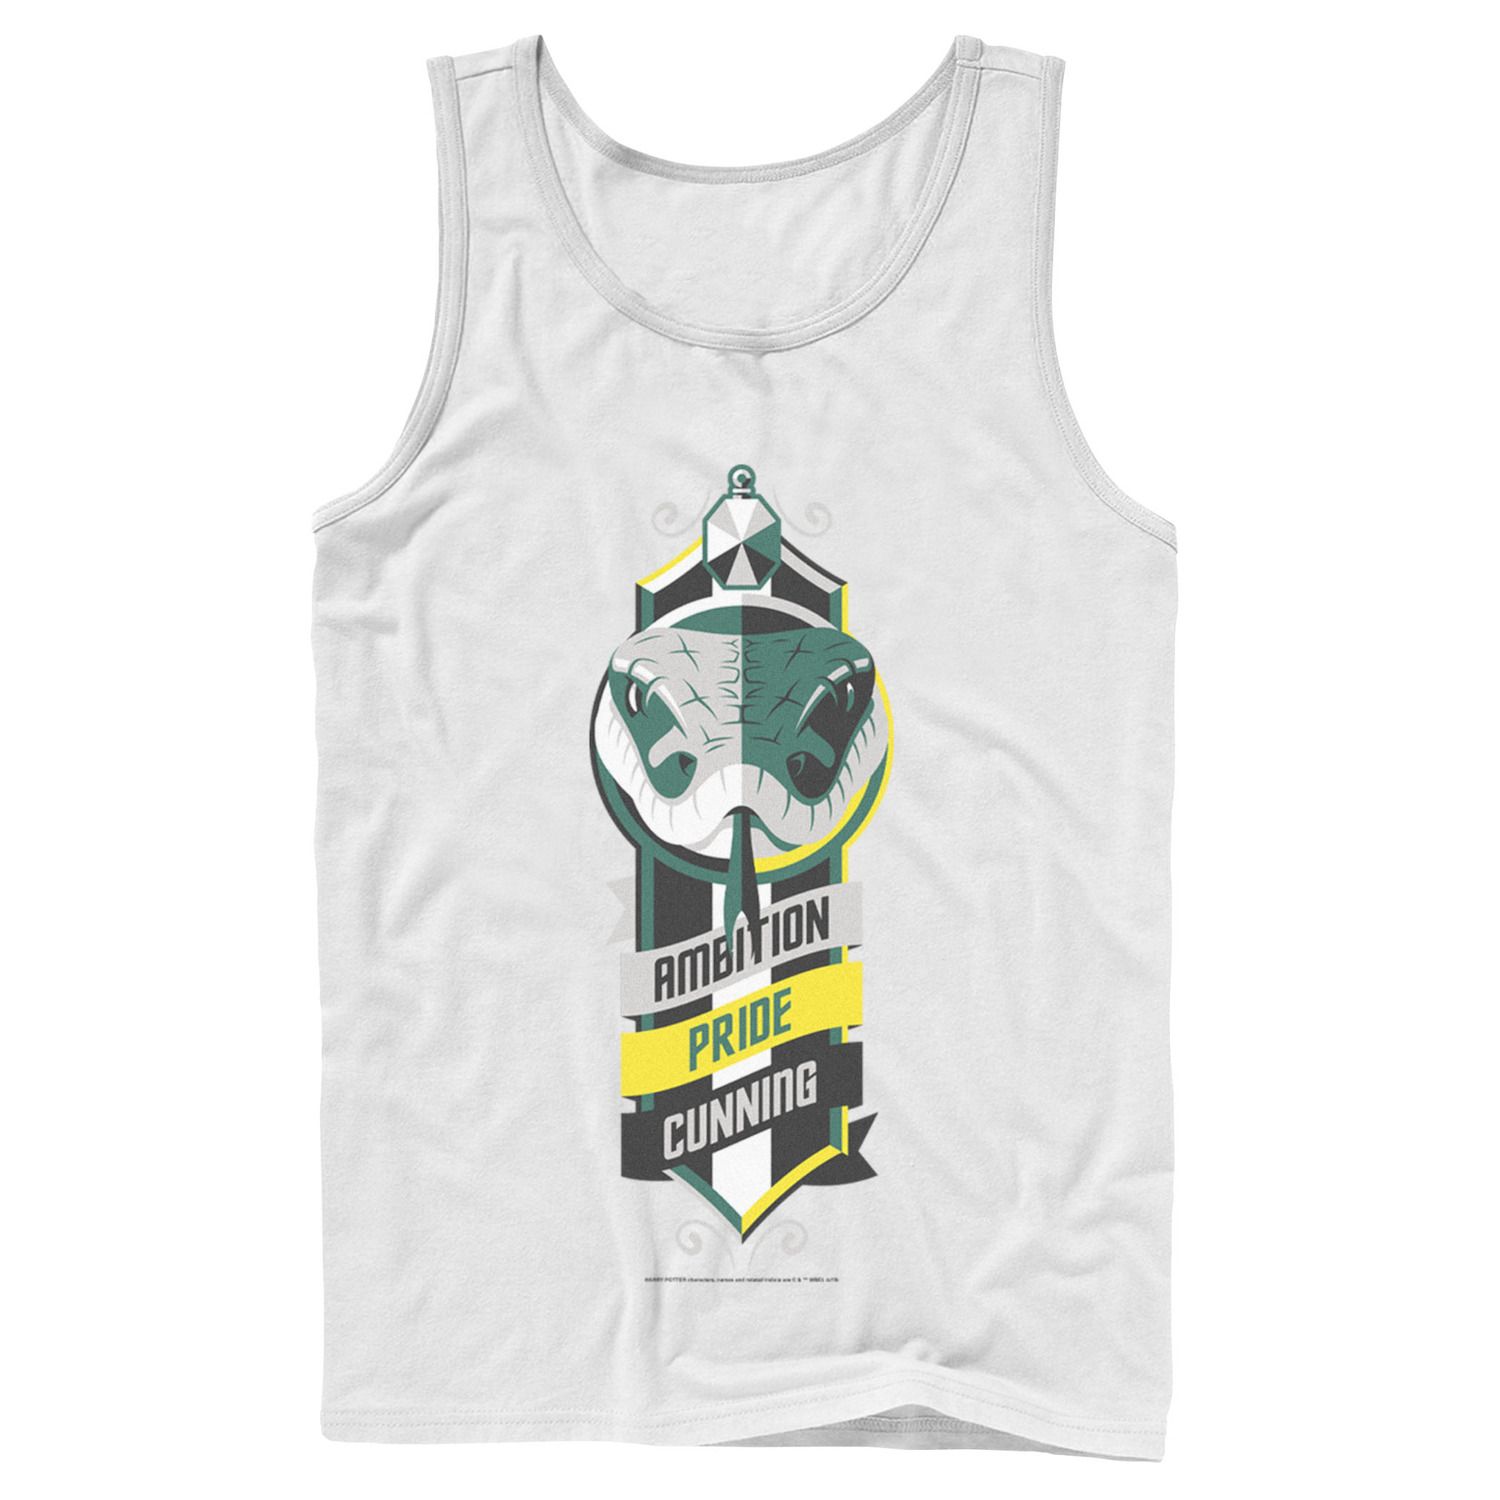 Image for Harry Potter Men's Slytherin Ambition Pride Cunning Logo Graphic Tank Top at Kohl's.